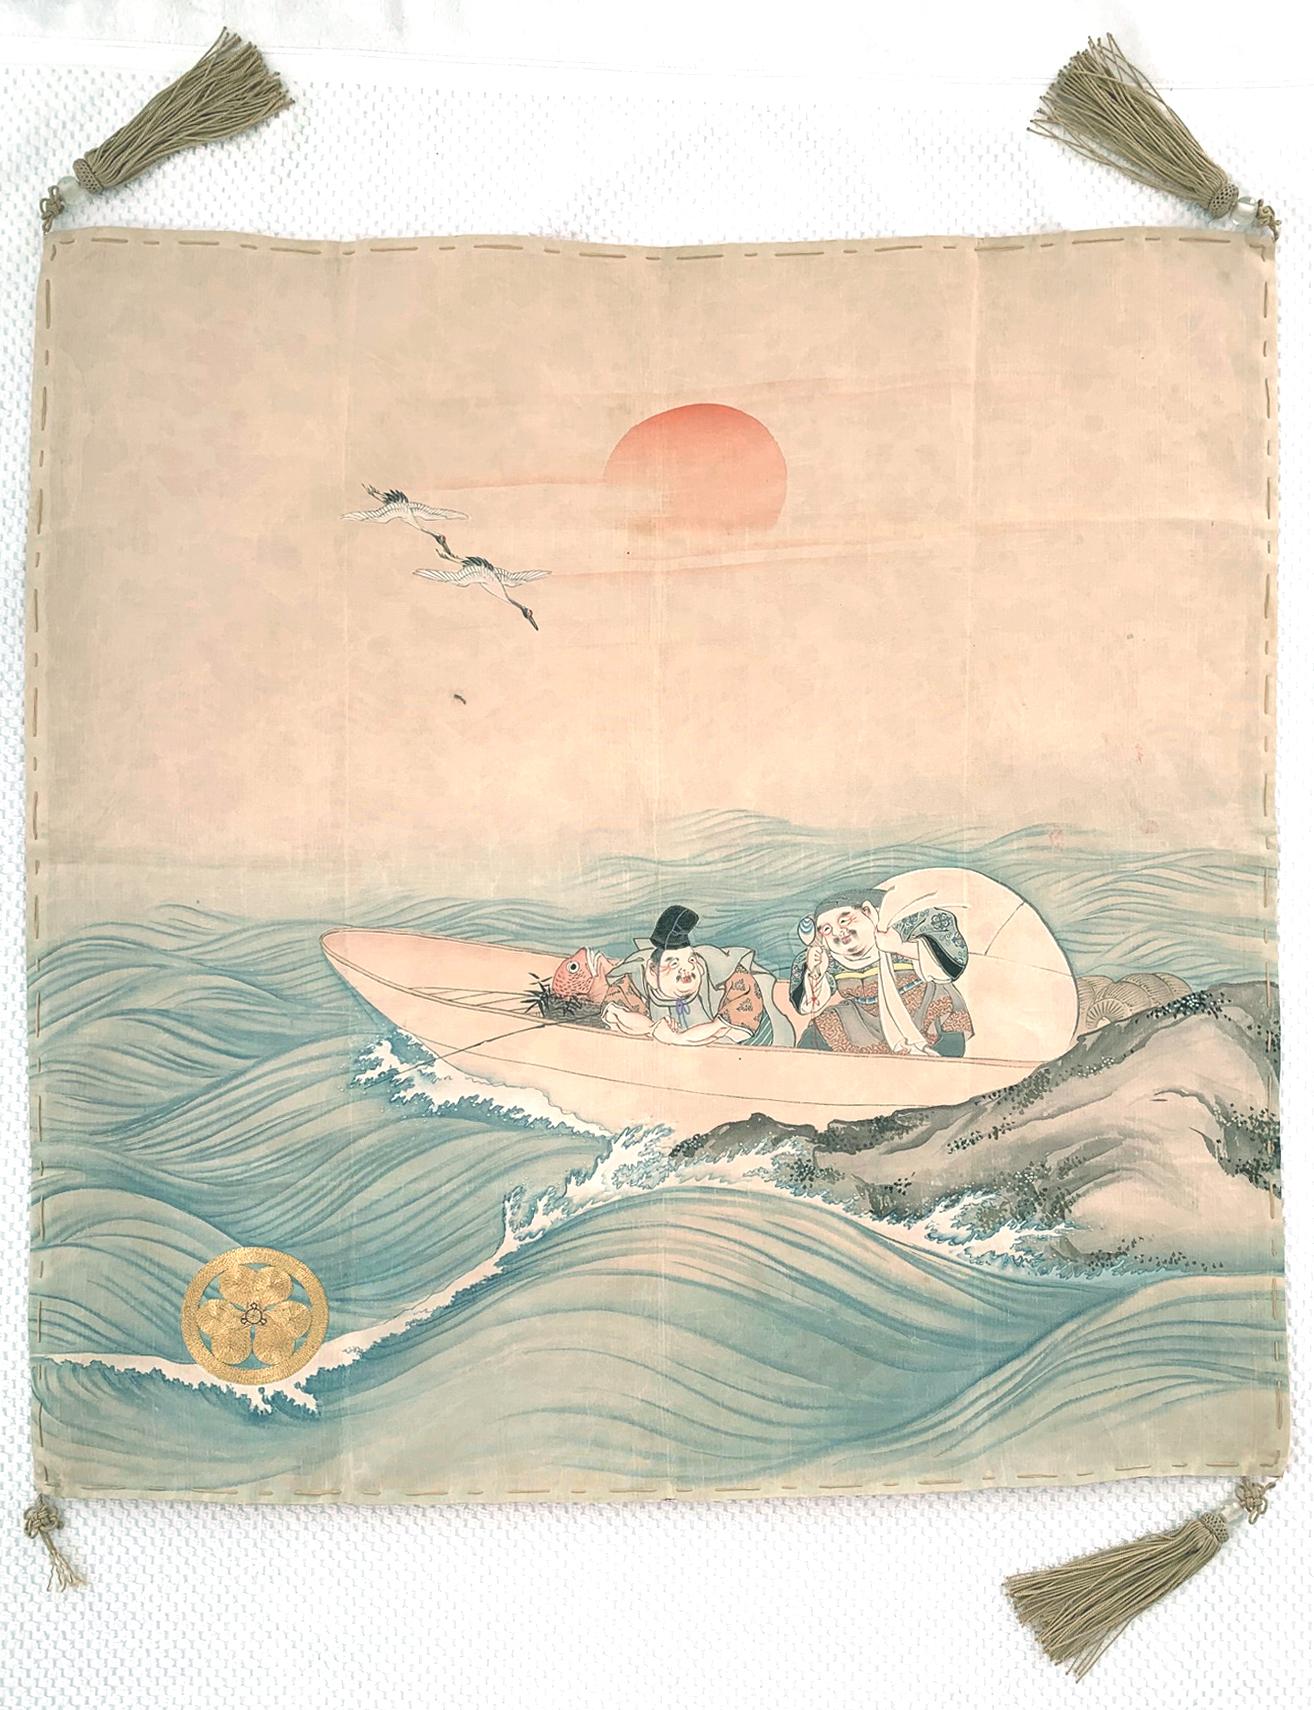 A Japanese silk Fukusa panel circa late 19th-early 20th century of Meiji Period. The front was beautifully decorated with Yuzen-zome, a labor intensive resist-dye technique invested by an artist monk Miyazaki Yuzensai (1654 -1736) of Edo period. It